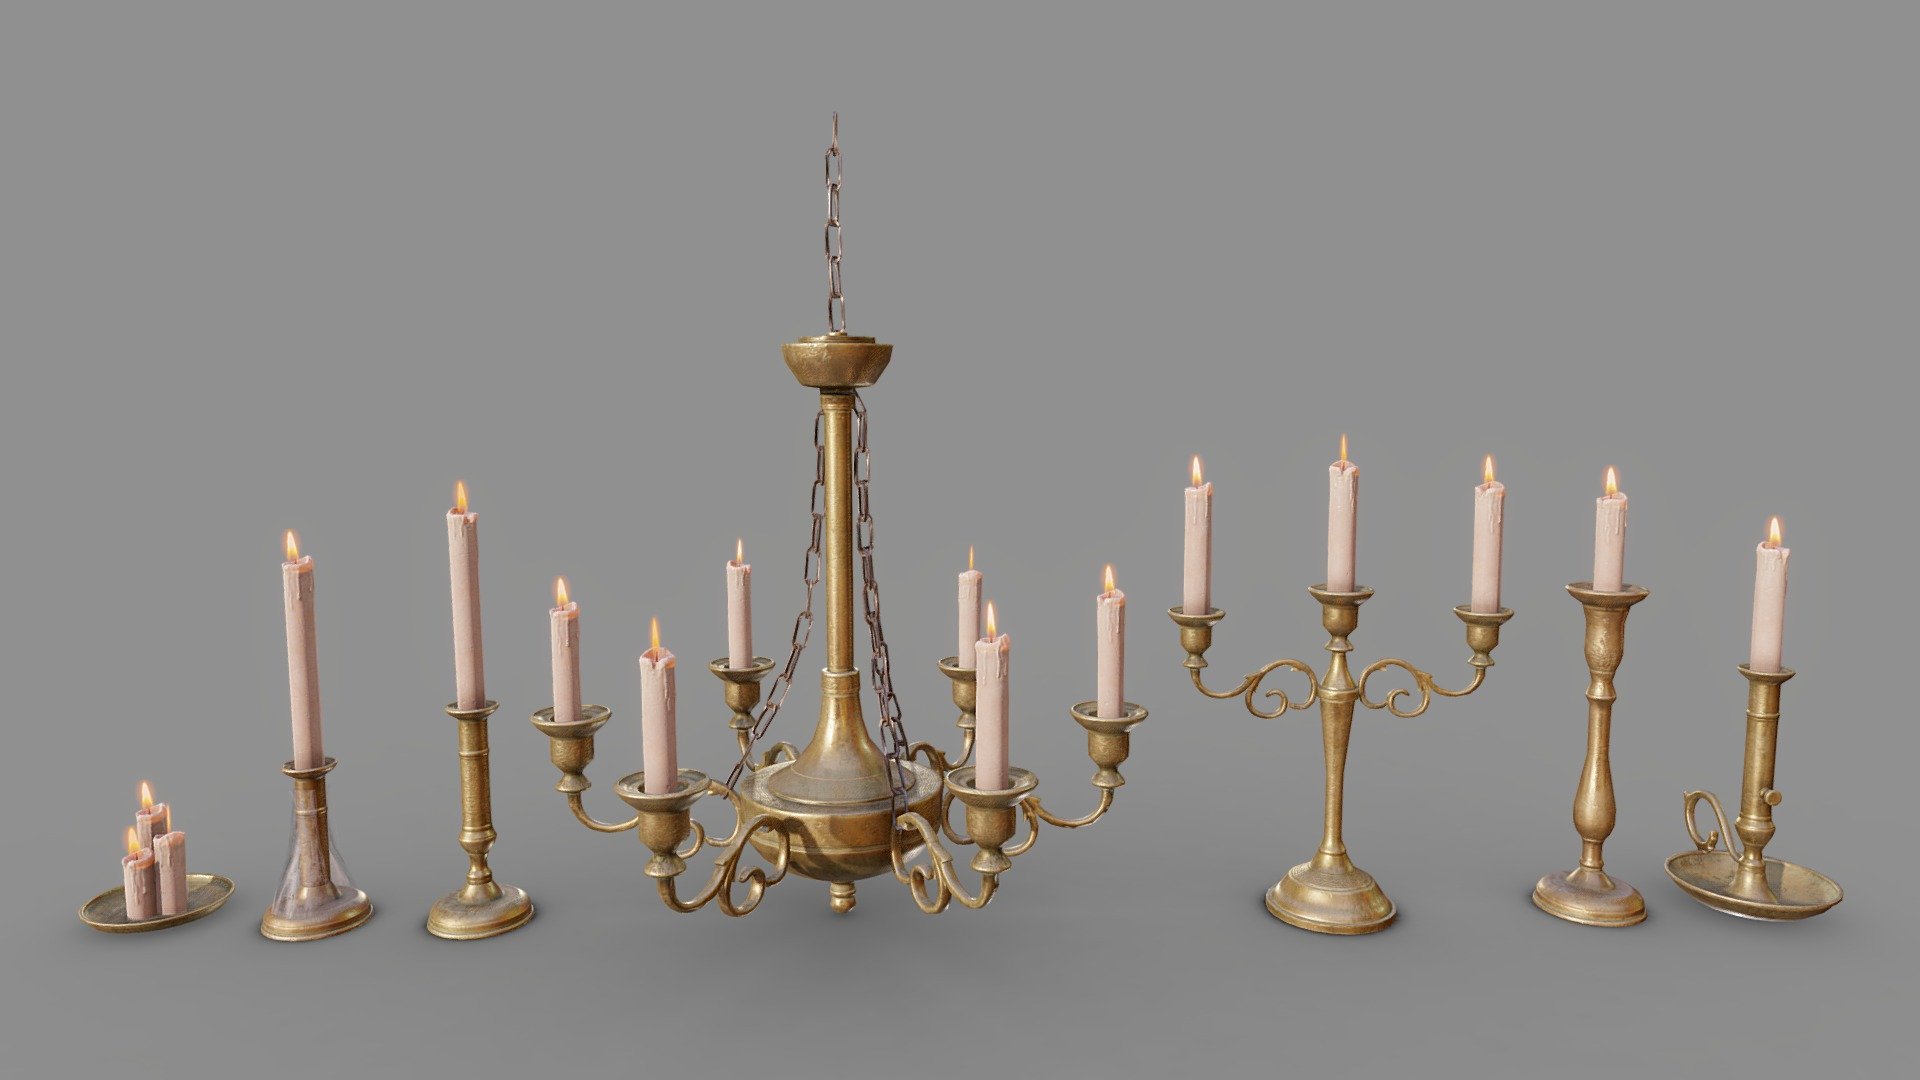 A collection of low-poly, game-ready candle holders and chandelier. These models look great in any old / victorian-era environment. the models are optimised for use in game, VR archviz, and visual production. 

Features




Model includes 7 unique candle holders including a chandelier with candles.

Optimised for game engines with clean topology. Objects are grouped, named appropriately and unwrapped 

27,005 triangles. 13,937 vertices

Modelled in Blender and textured in Substance Painter.

Textures

This model uses 1 PBR texture set. All textures are in .png at 4096x4096 and includes: Base Colour, Roughness, Metallic, Normal, Opacity, Emissive - Candle Holder and Chandelier Pack - Low-Poly - Buy Royalty Free 3D model by Matthew Collings (@mtcollings) 3d model